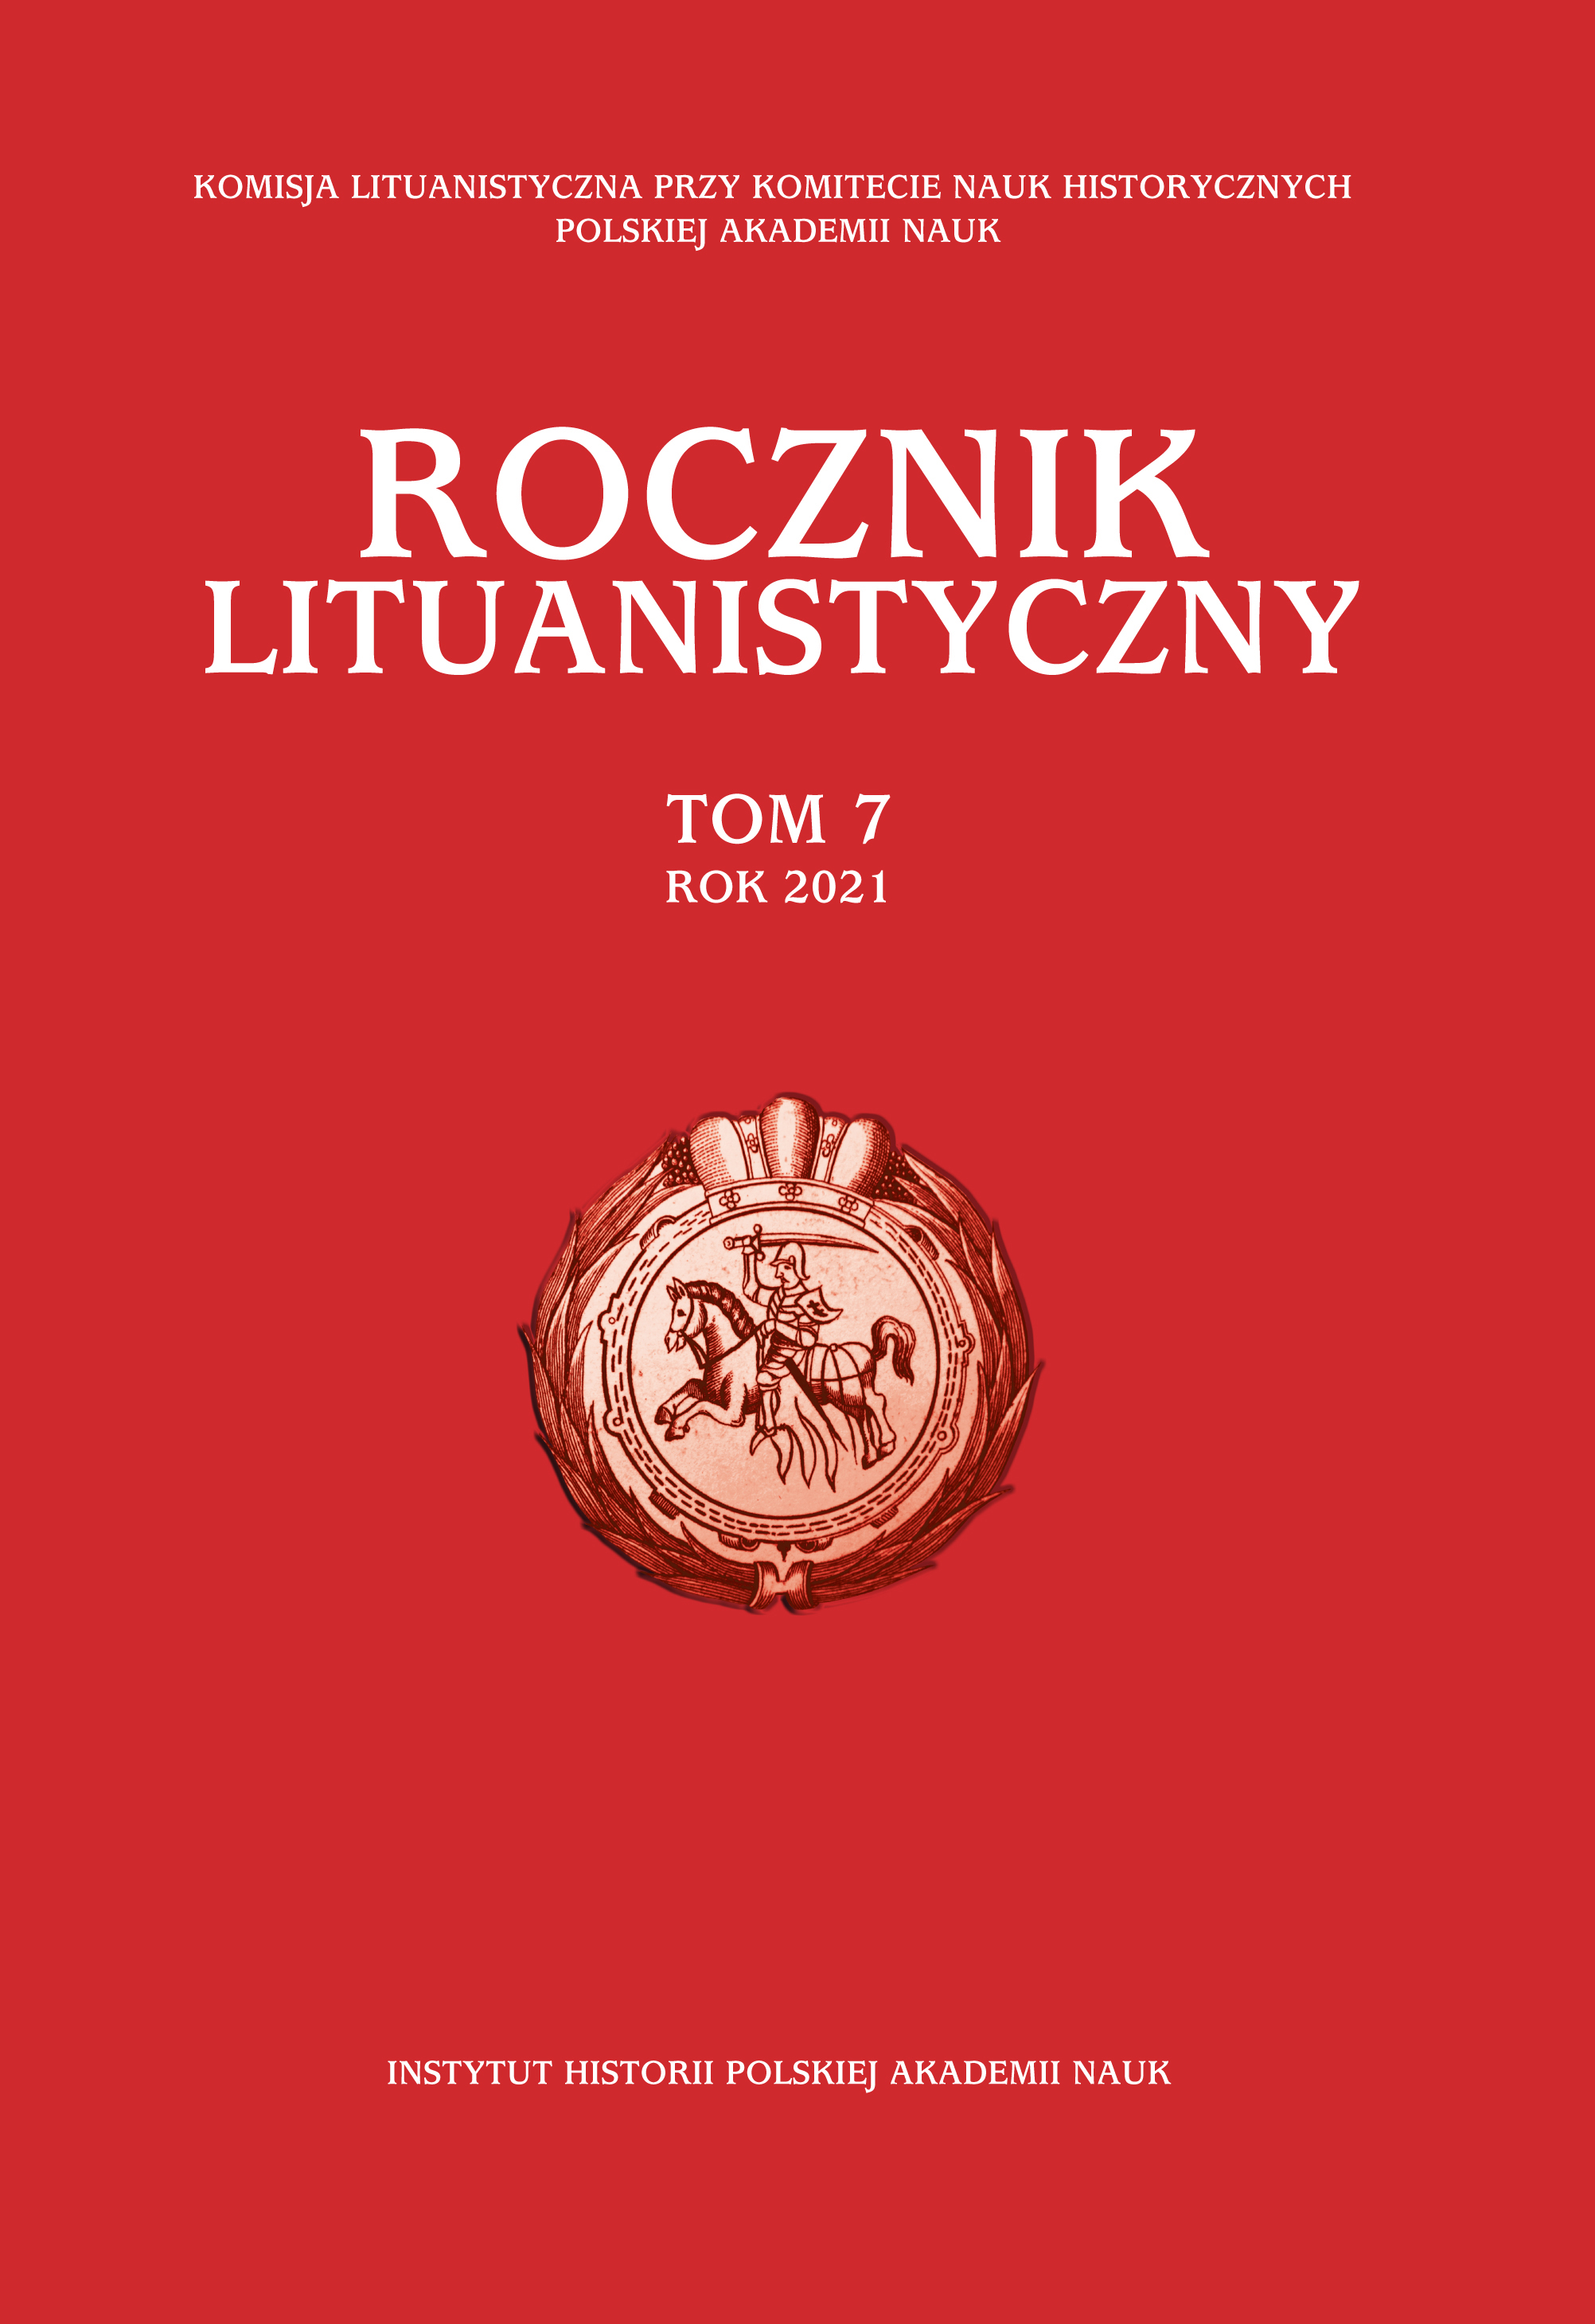 Kazimierz Bem, Calvinism in the Polish Lithuanian Commonwealth 1548–1648. Th  e Churches and the Faithful (St Andrews Studies in Reformation History), Brill, Leiden–Boston 2020, ss. 322, 41 kol. il., 5 map